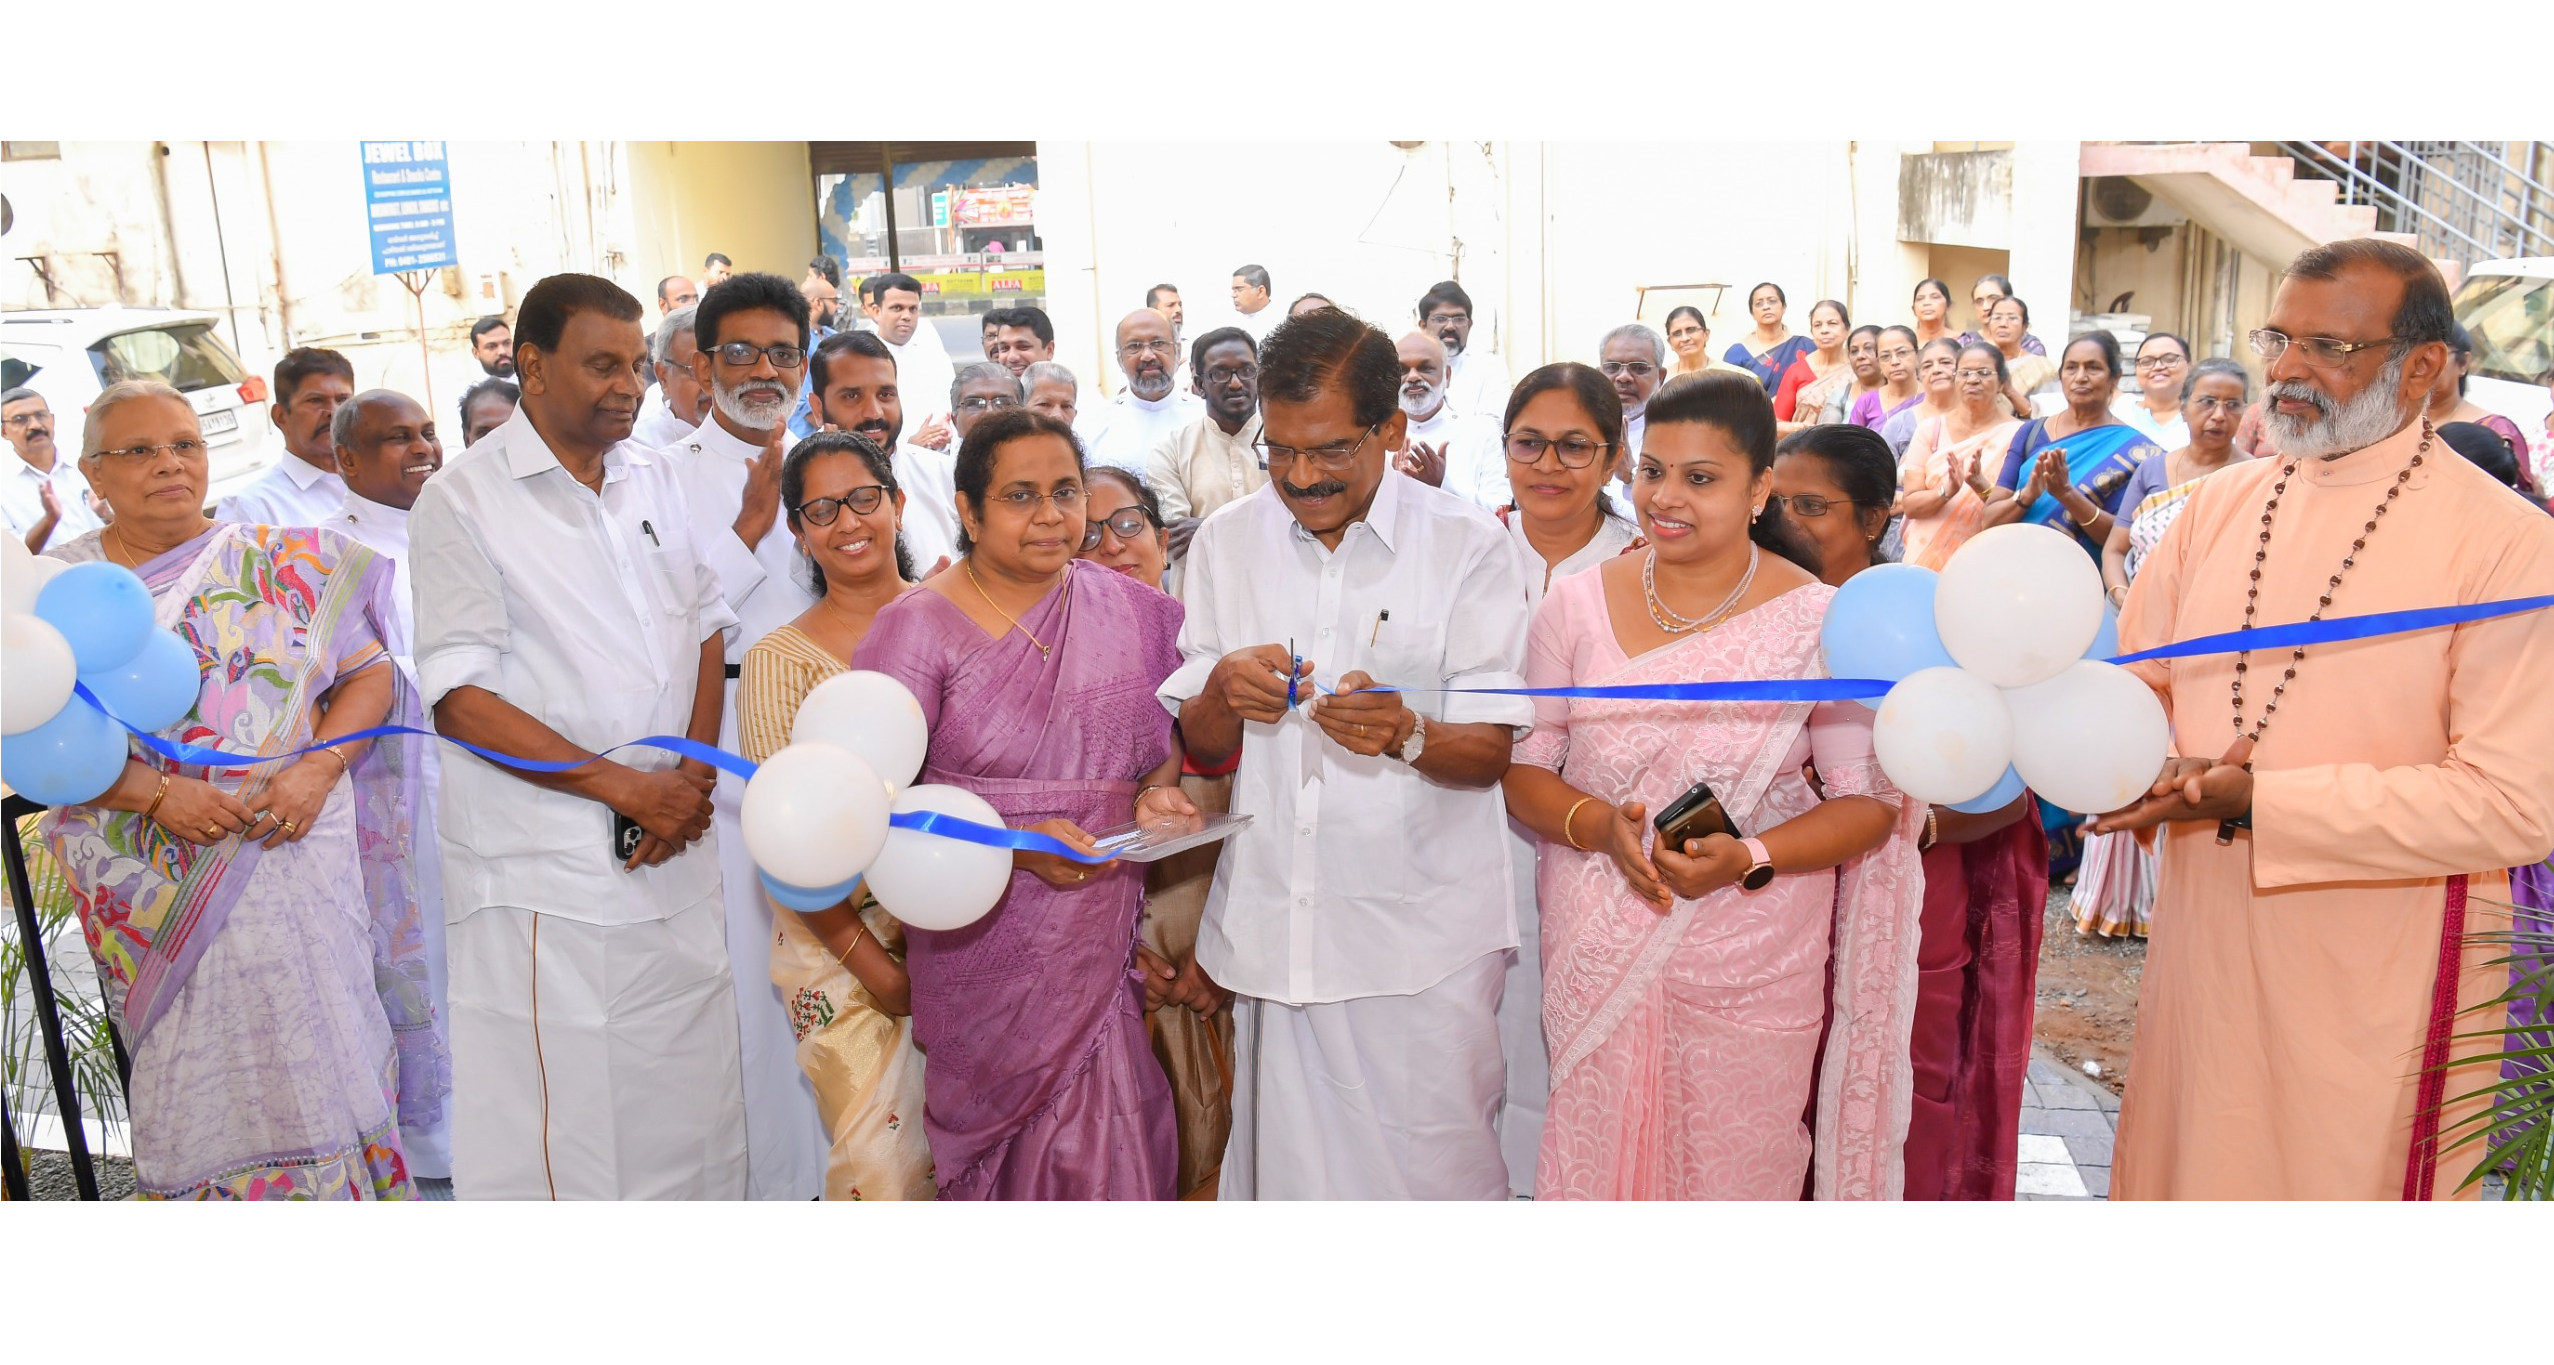 Jewel Box Restaurant and Elma Bakery, an Initiative of the Madhya Kerala Diocese Women's Fellowship, have Resumed Operations in a Renovated Building.